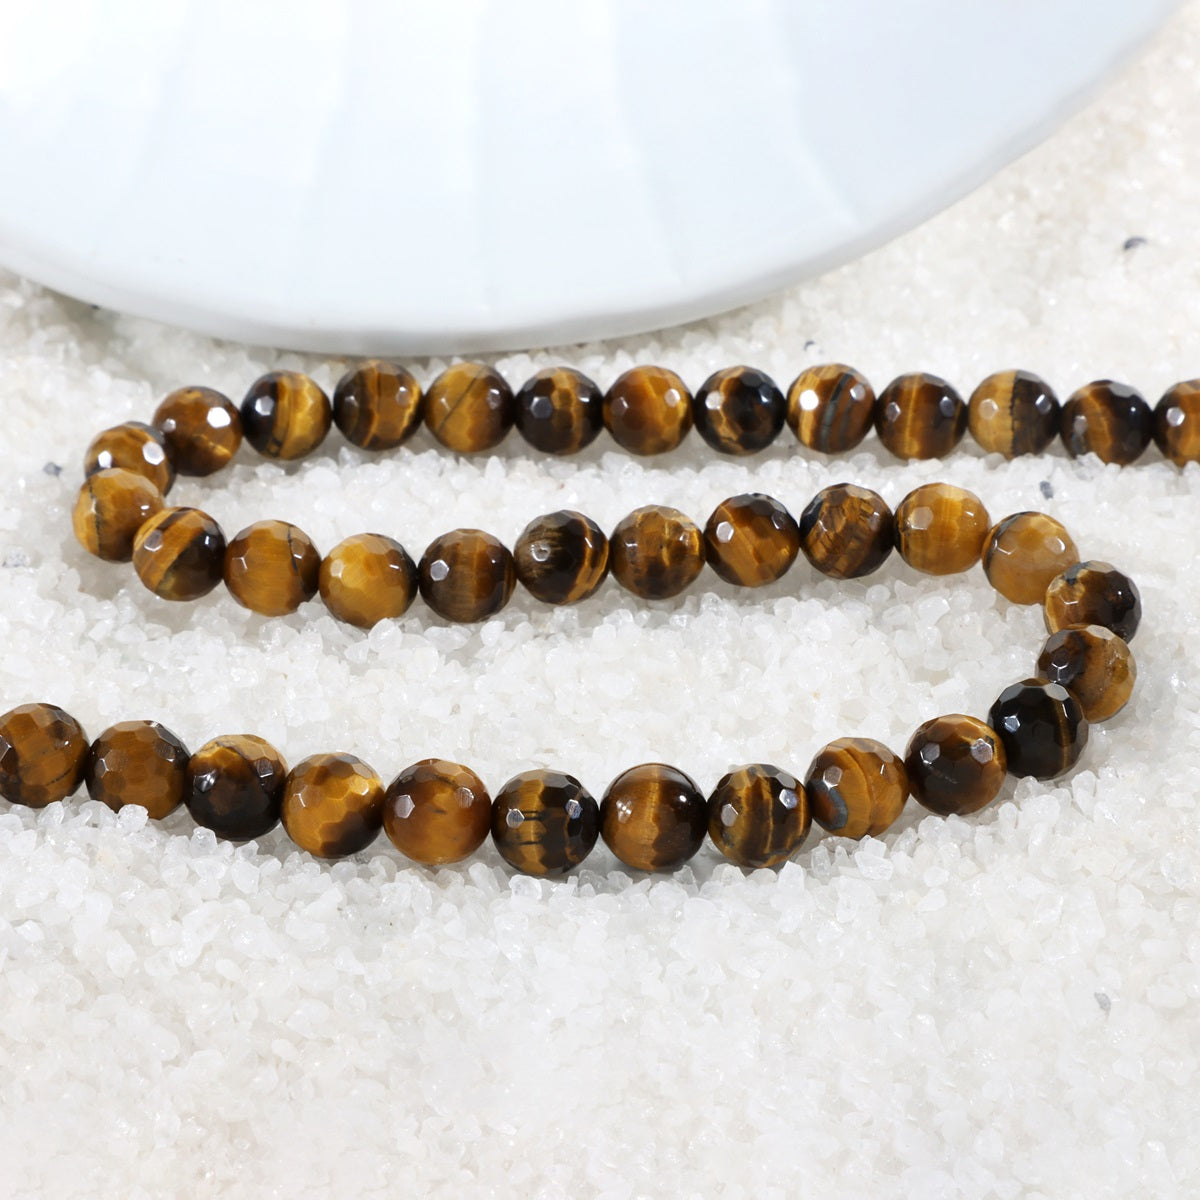 Men's Tiger's Eye Gemstone Silver Necklace: Elegance personified